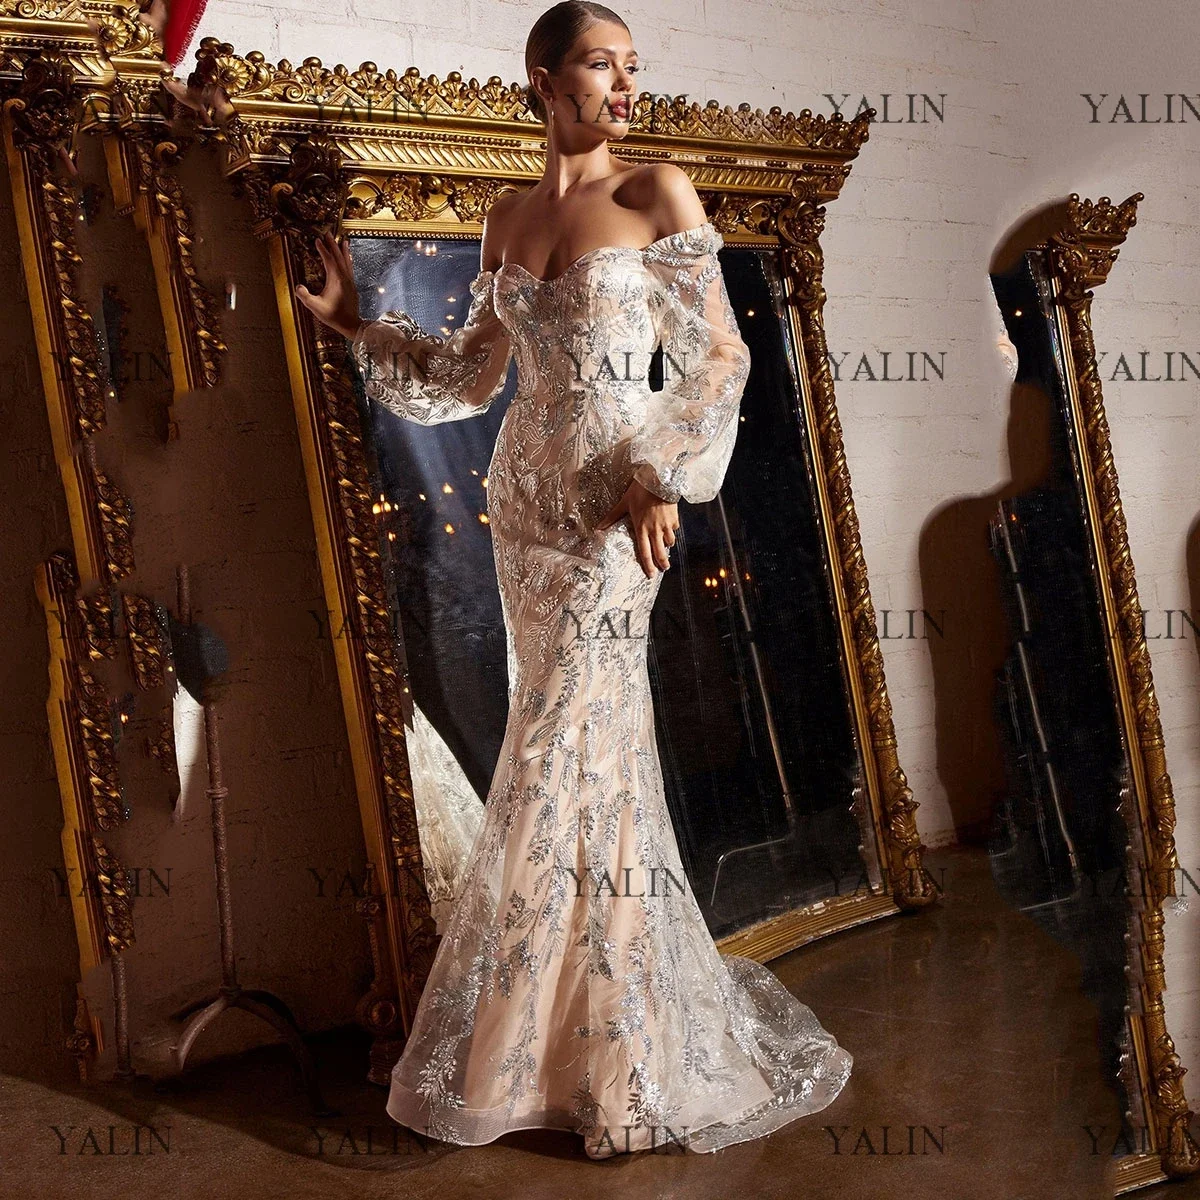 

YALIN Glitter Champagne Sheath Evening Dresses Sequined Appliques Puff Sleeve Celebrity Gown Off Shoudler Pageant Party